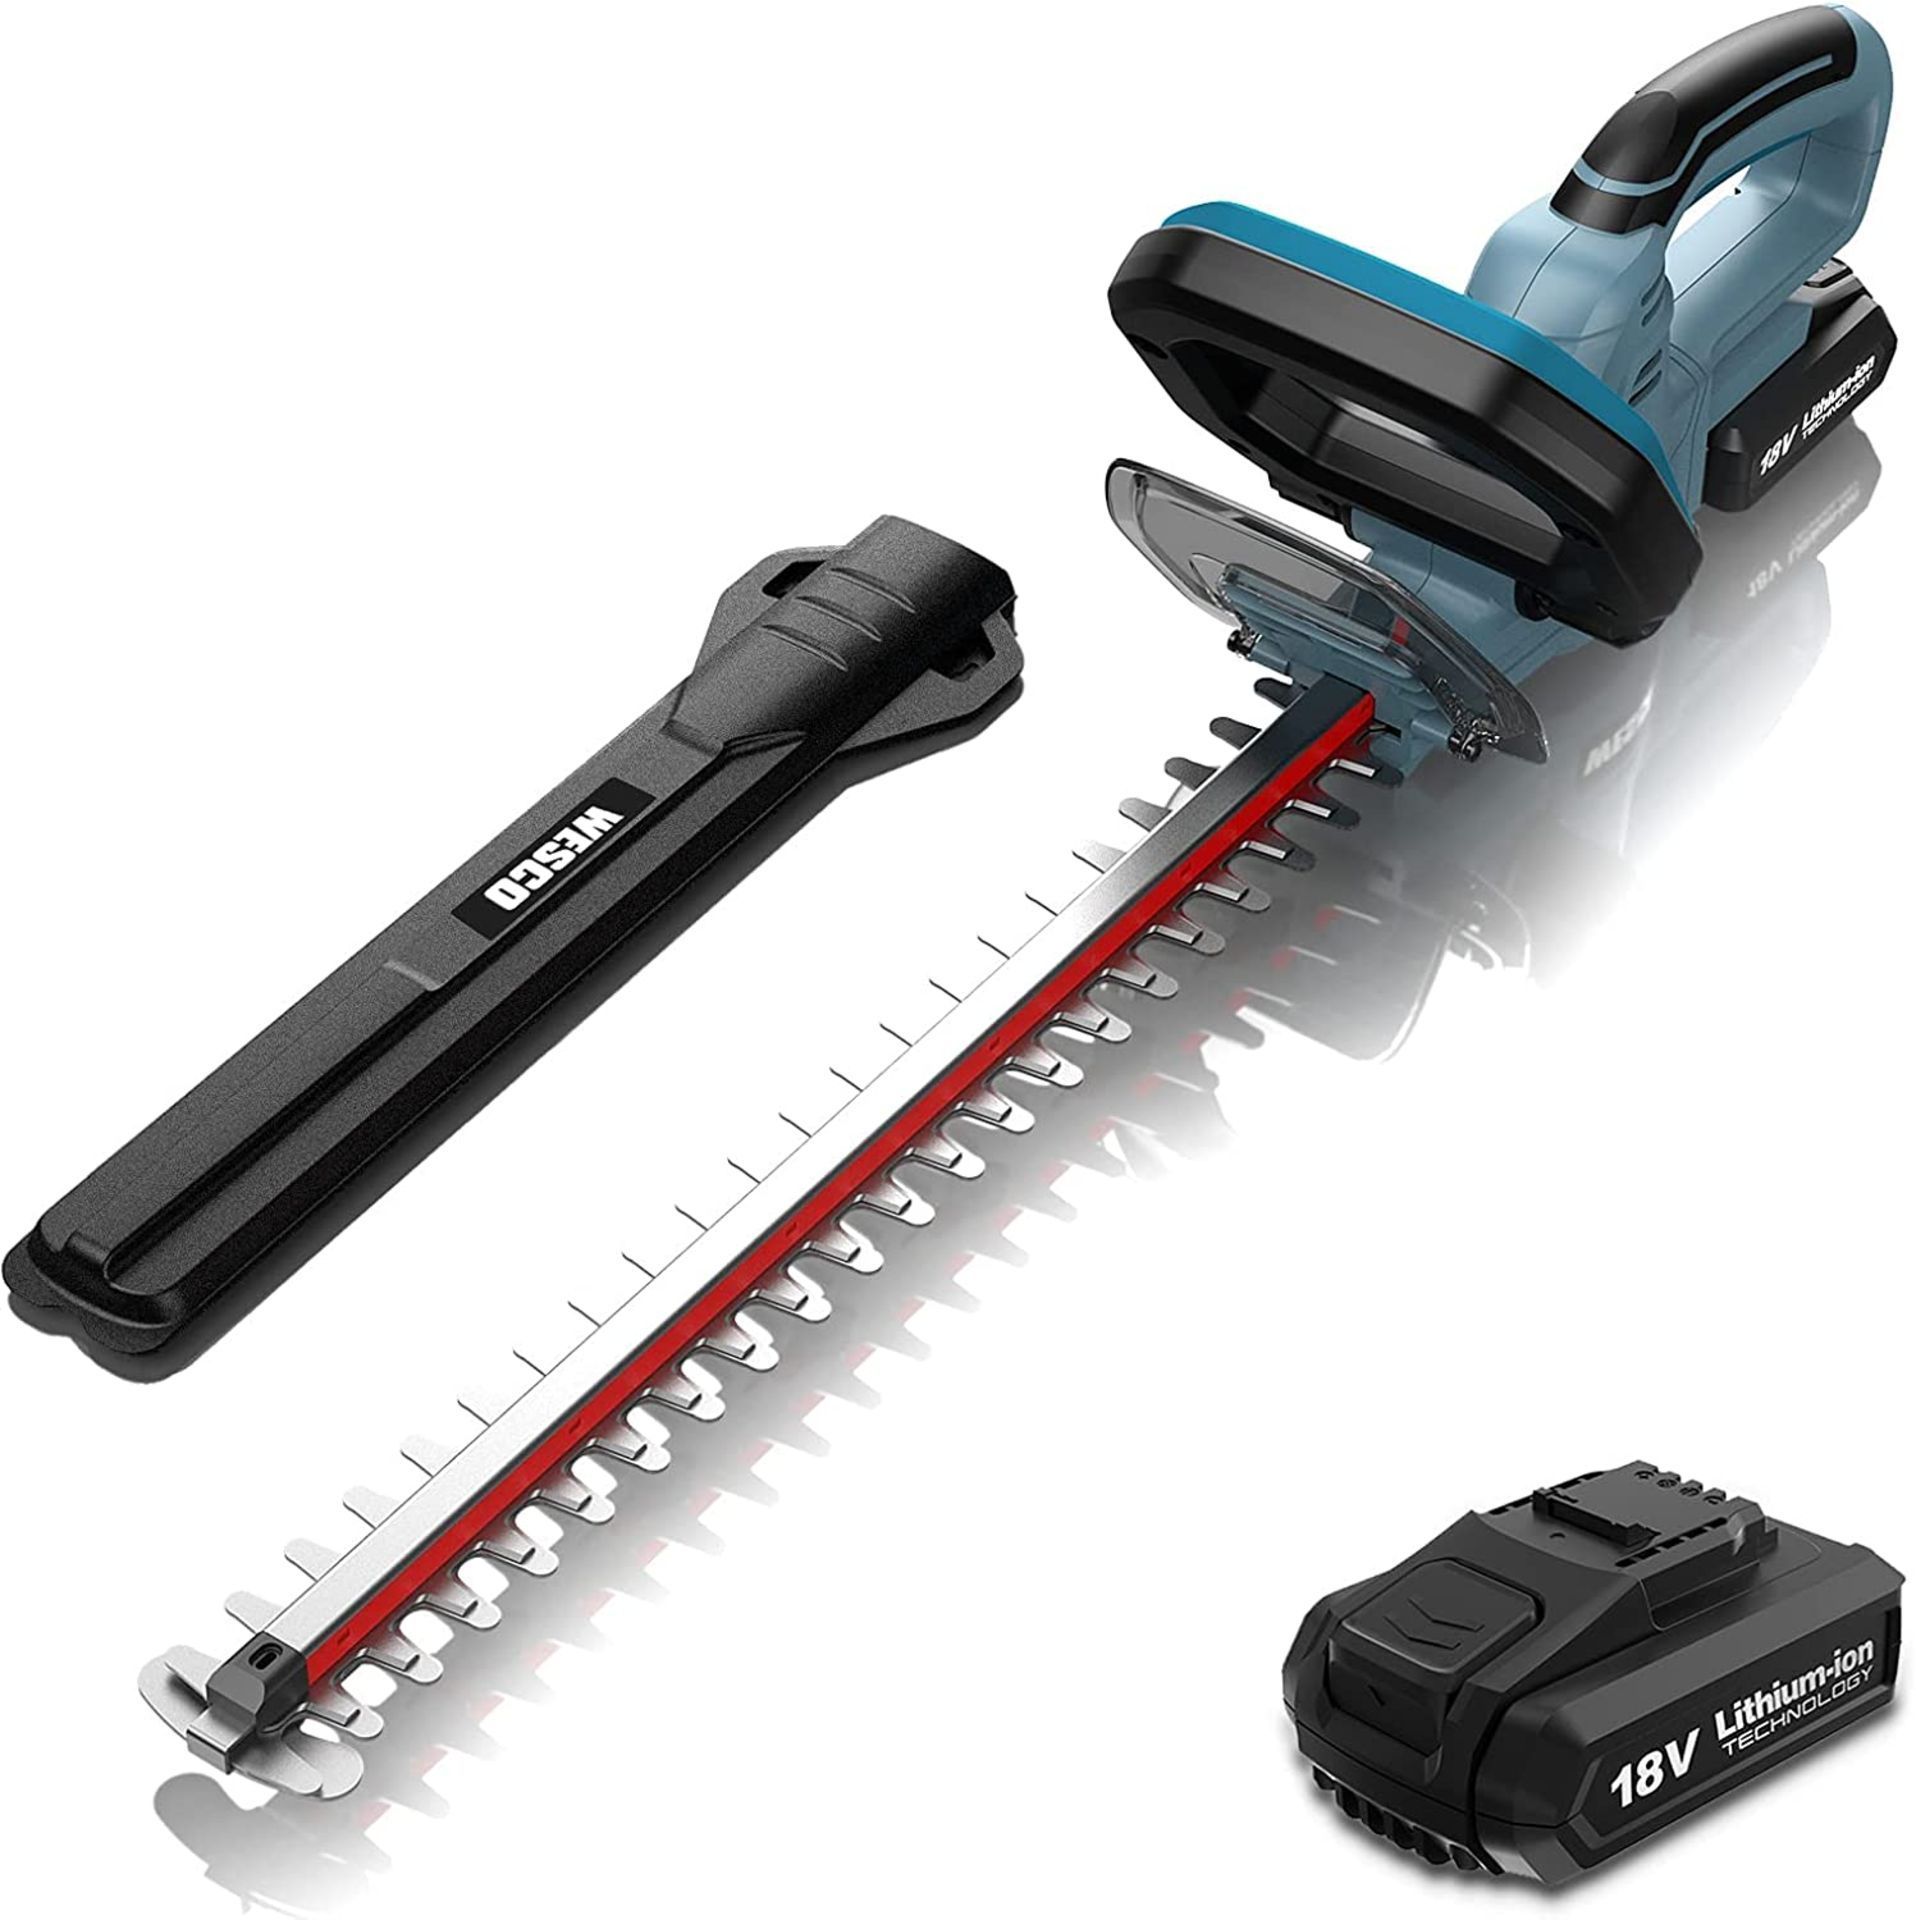 TRADE LOT 6 x New & Boxed WESCO Cordless Hedge Trimmer & Hedge Cutter with 2 x 18V Lithium-Ion